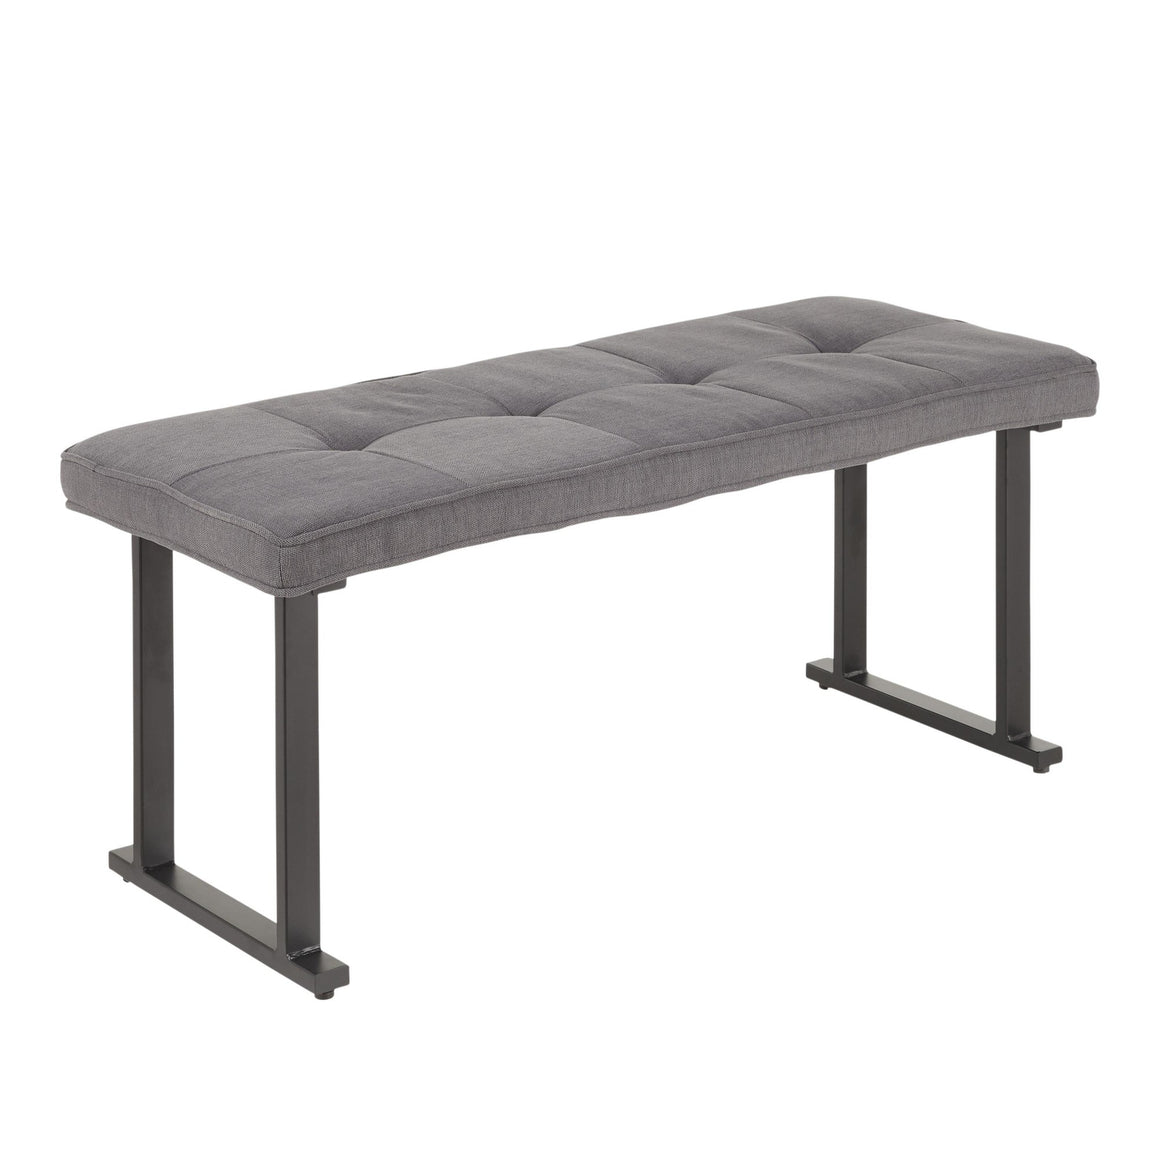 Roman Industrial Bench in Antique Metal and Grey Fabric Cushion by LumiSource